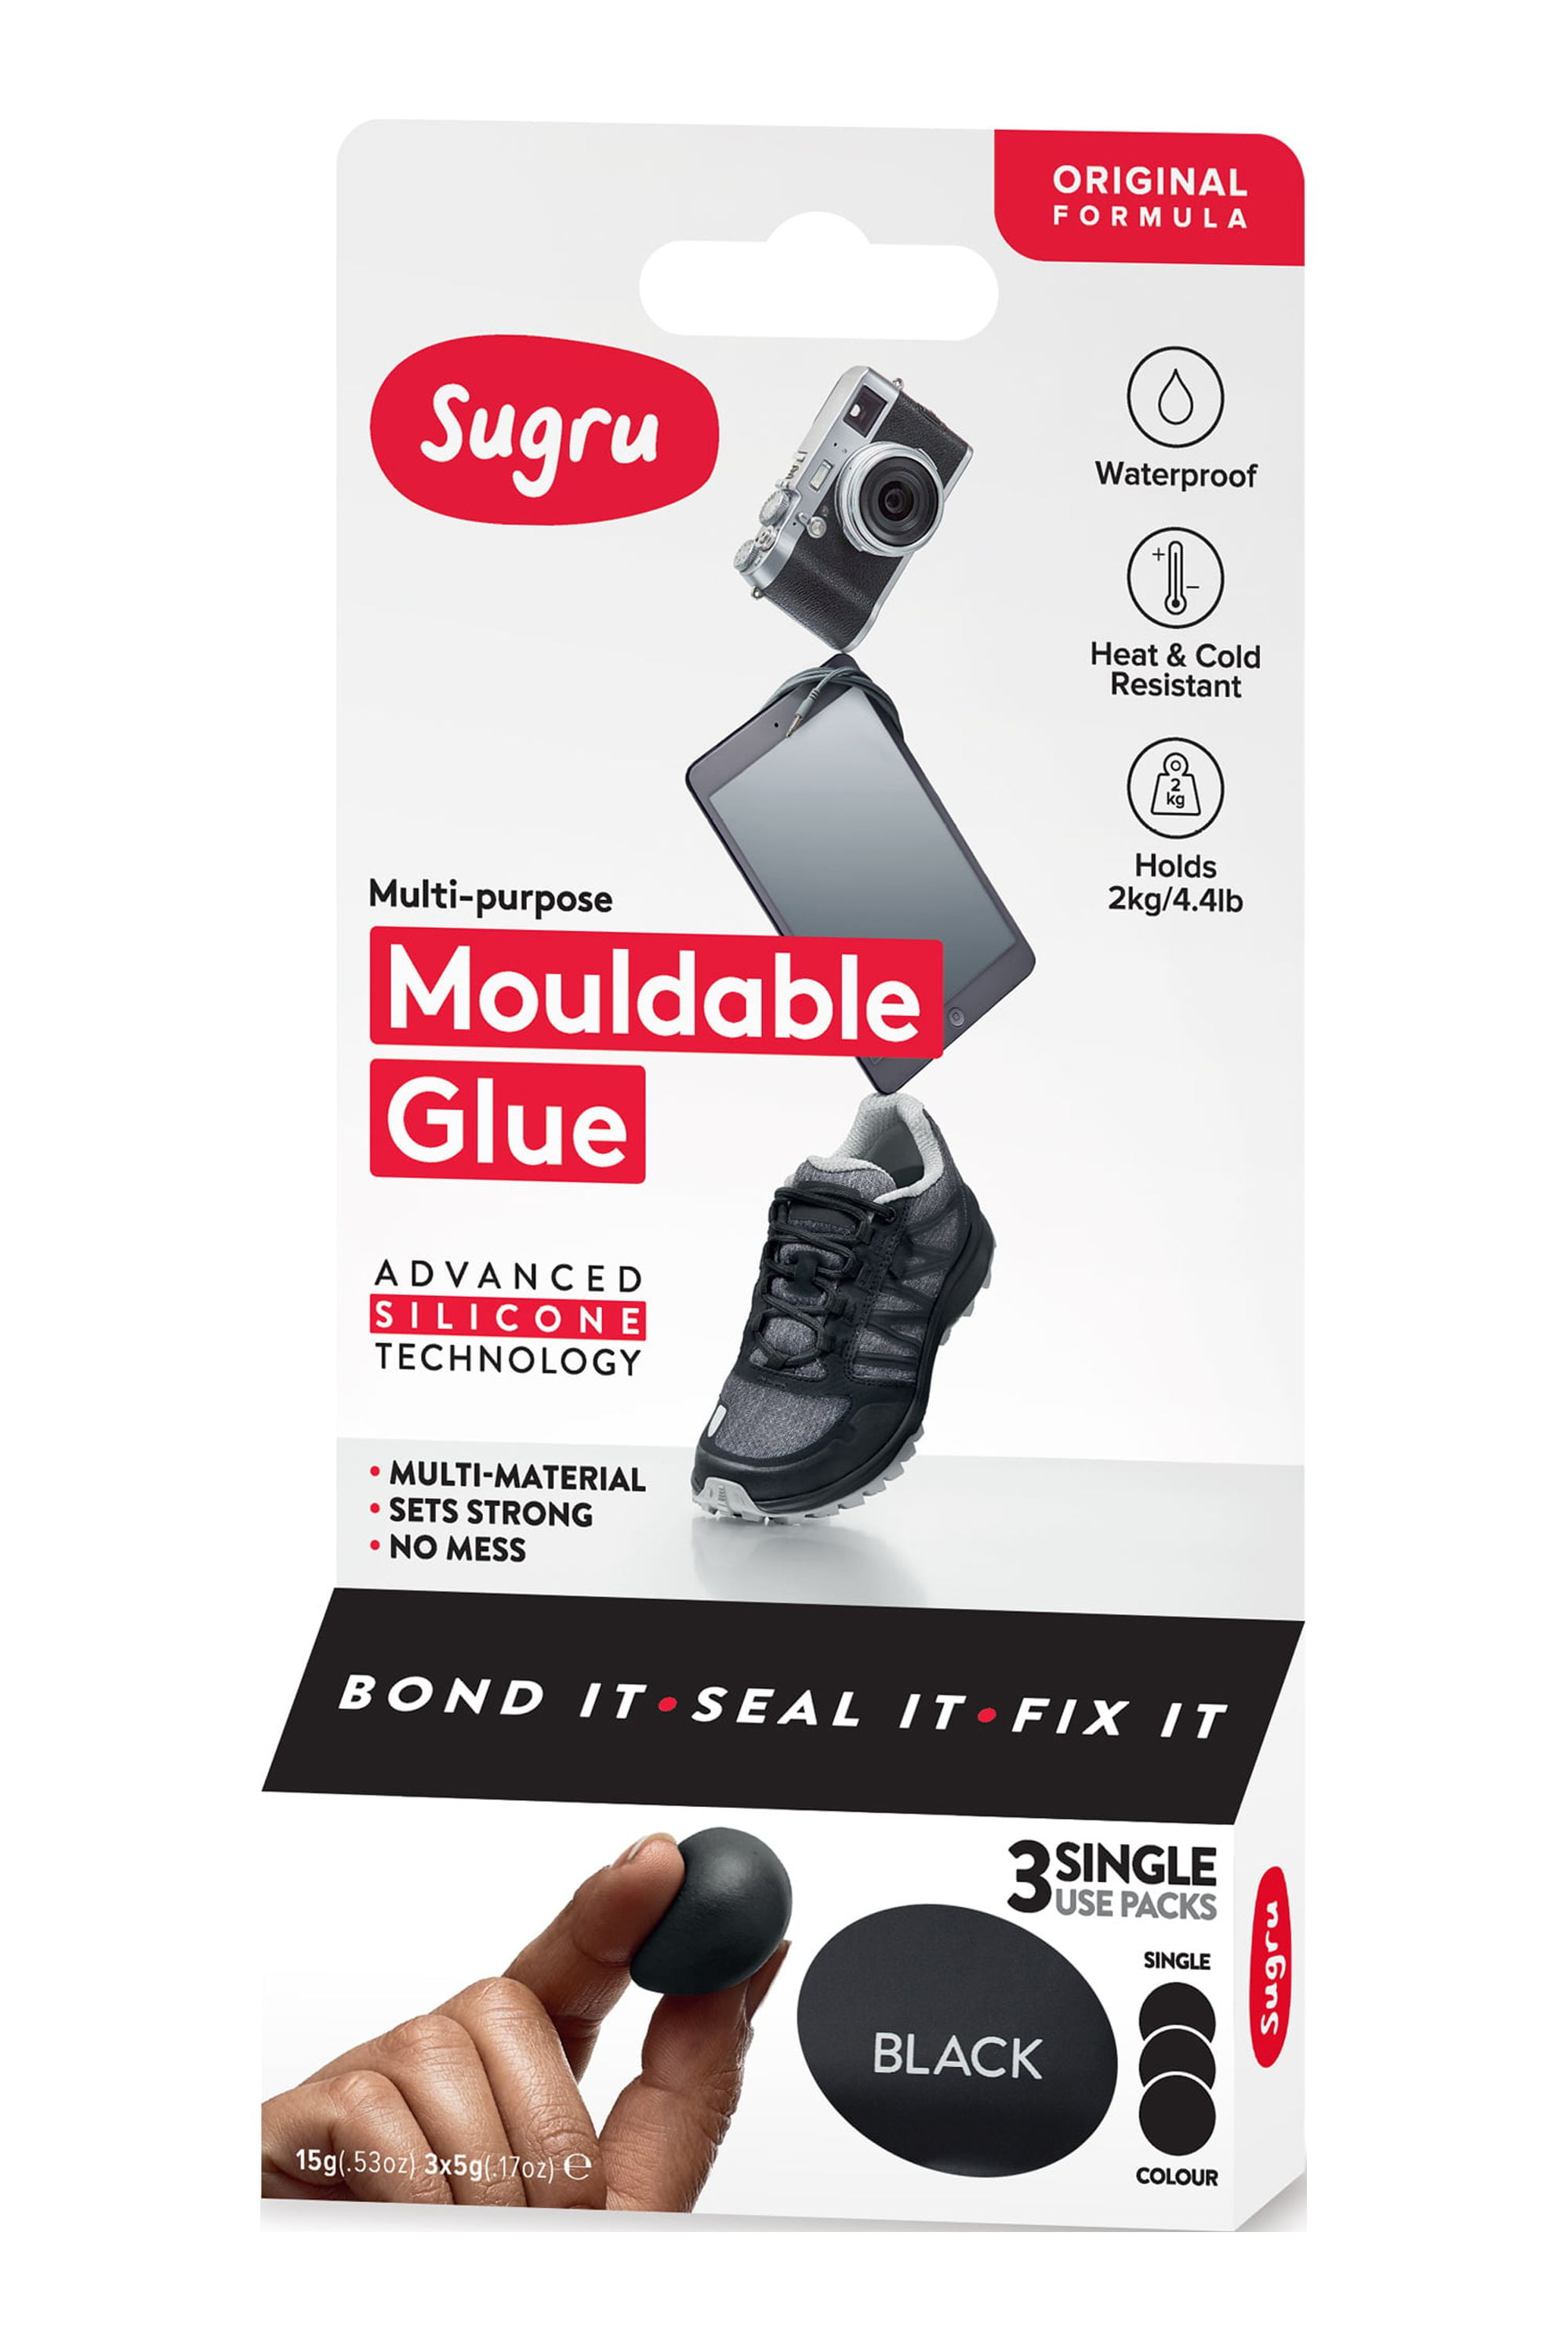 Review of Sugru - the amazing moldable adhesive (Miscellany Monday